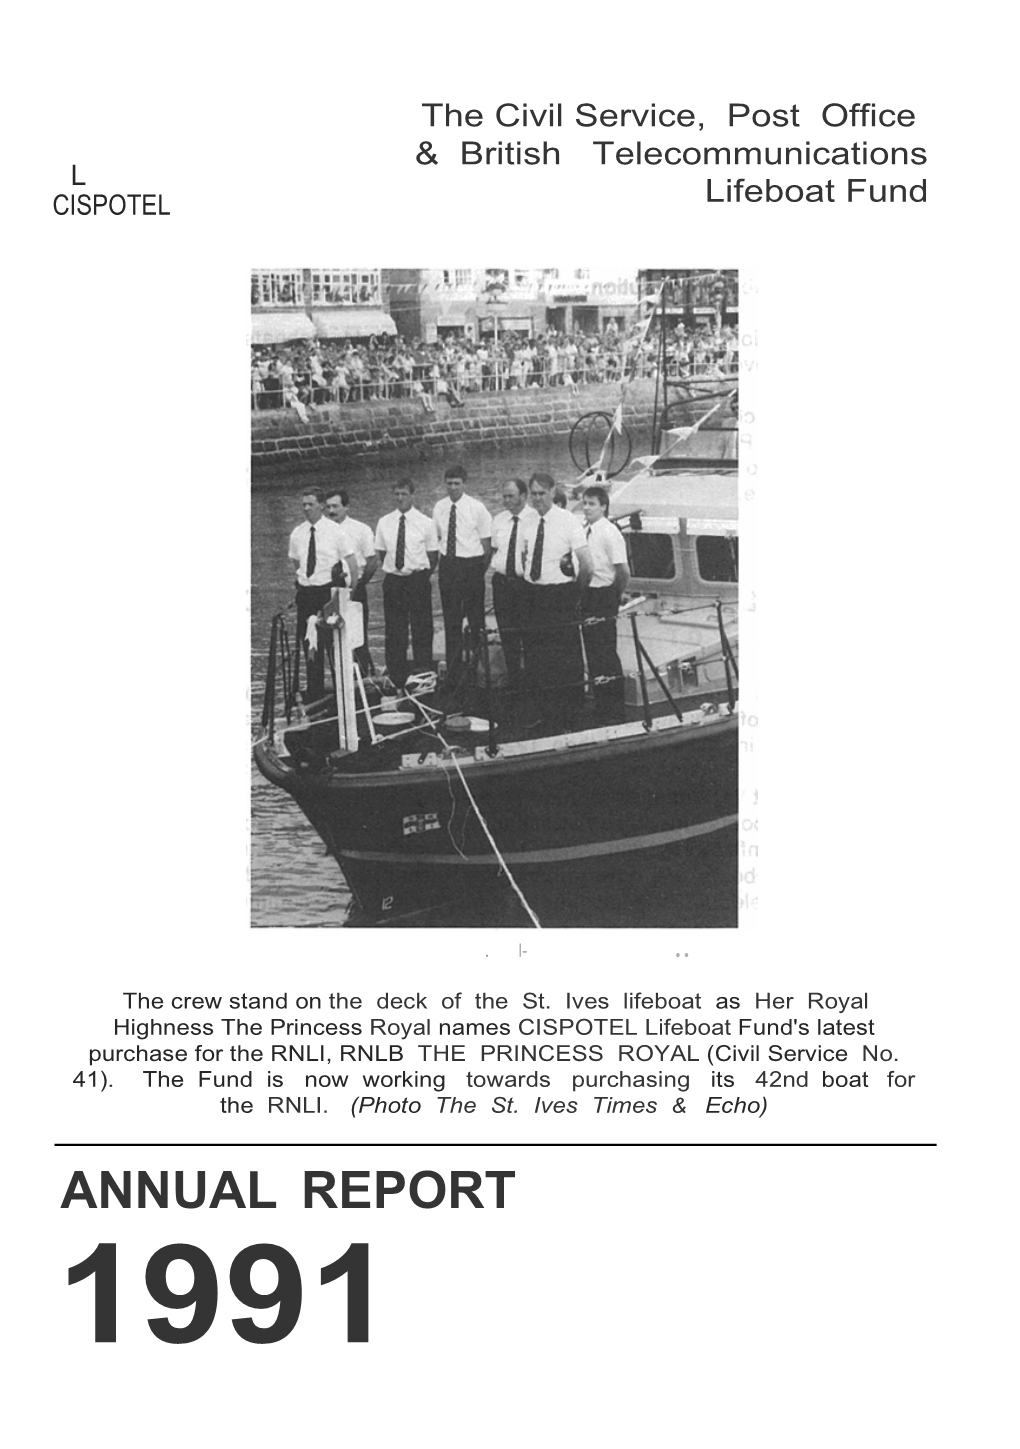 Annual Report 1991 the Civil Service, Post Office and British Telecommunications Lifeboat Fund